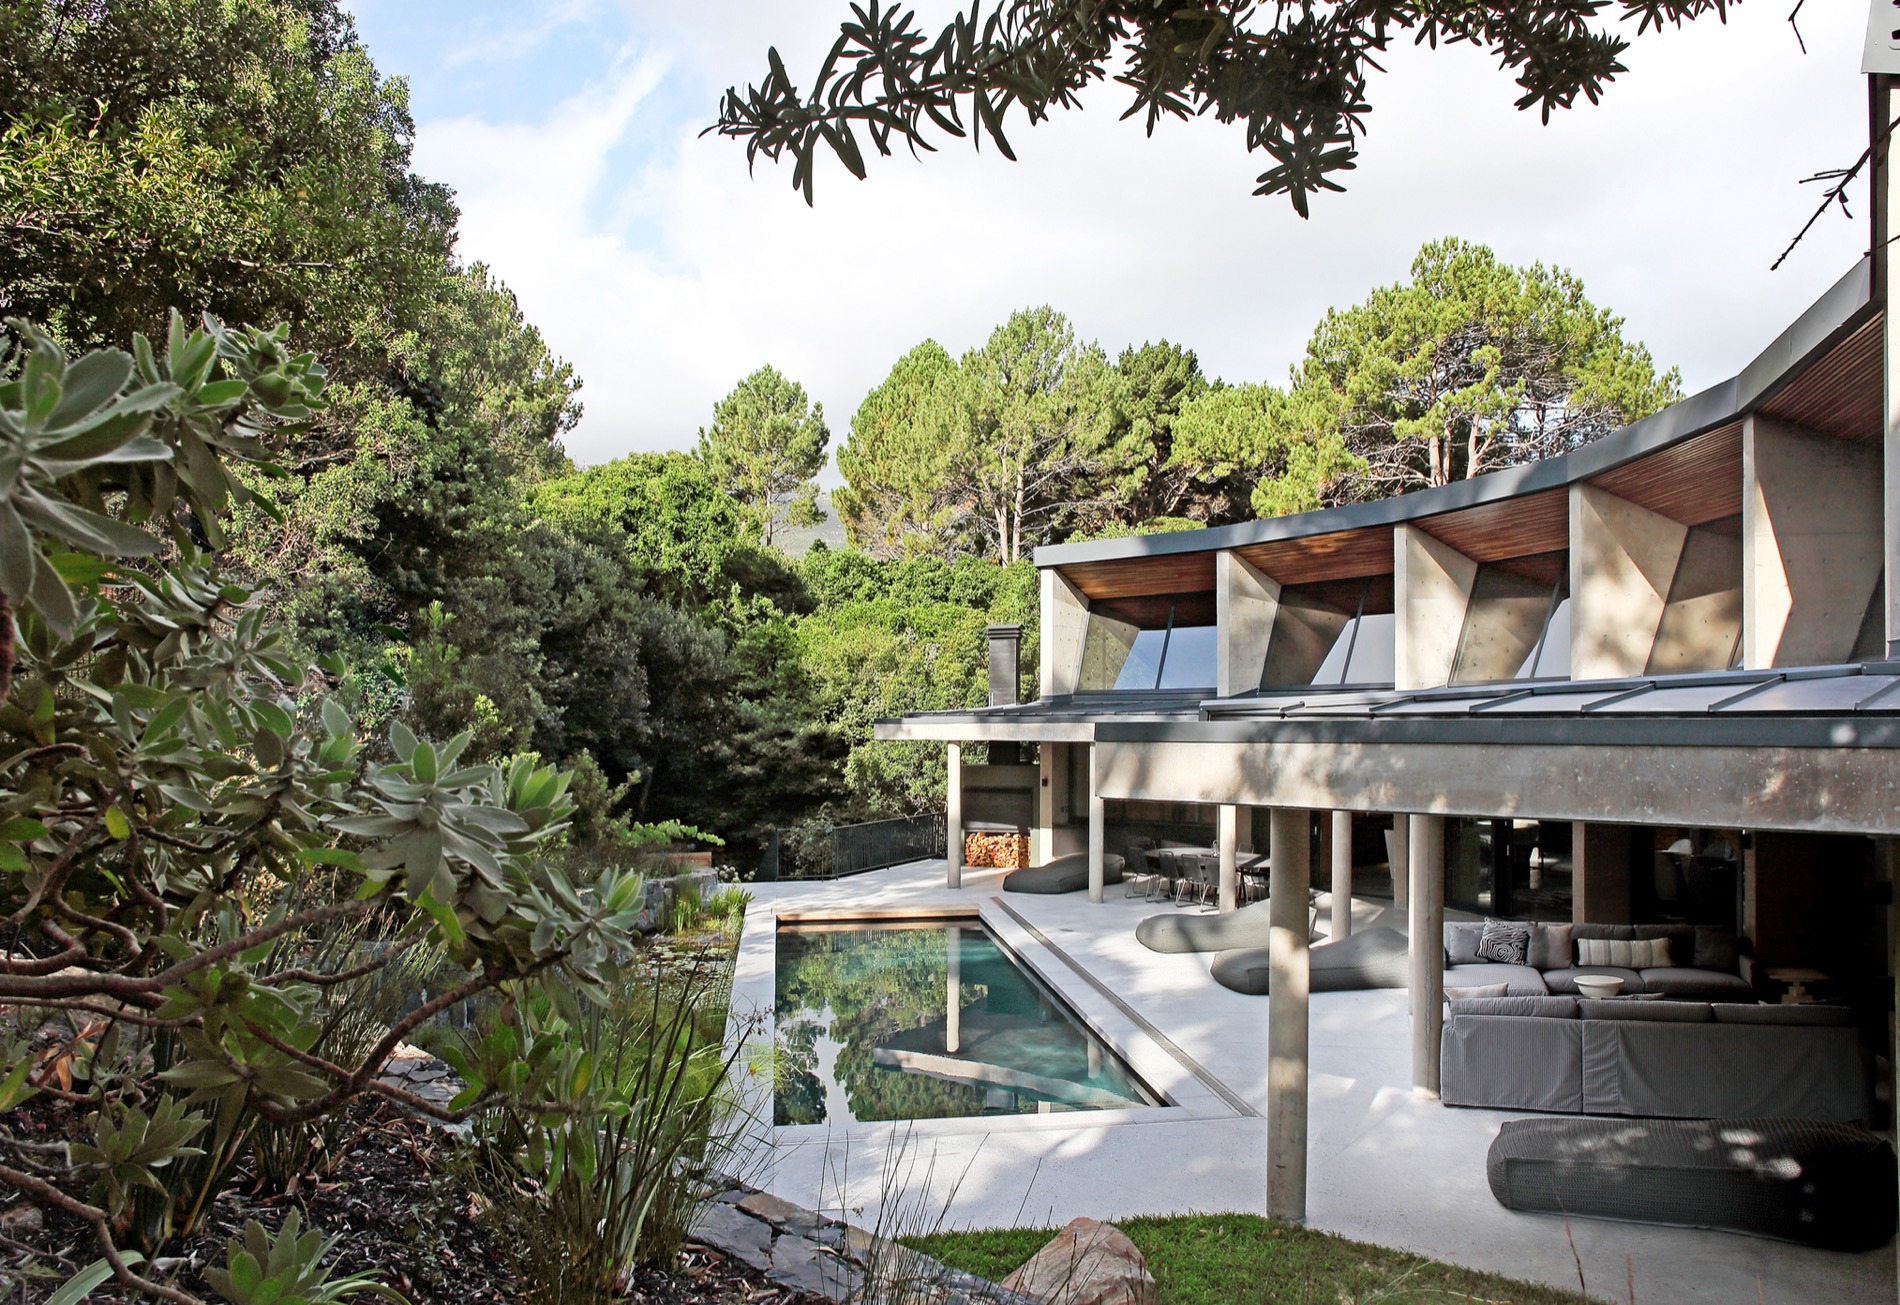 Photo 1 of Villa Verte accommodation in Hout Bay, Cape Town with 4 bedrooms and 4 bathrooms